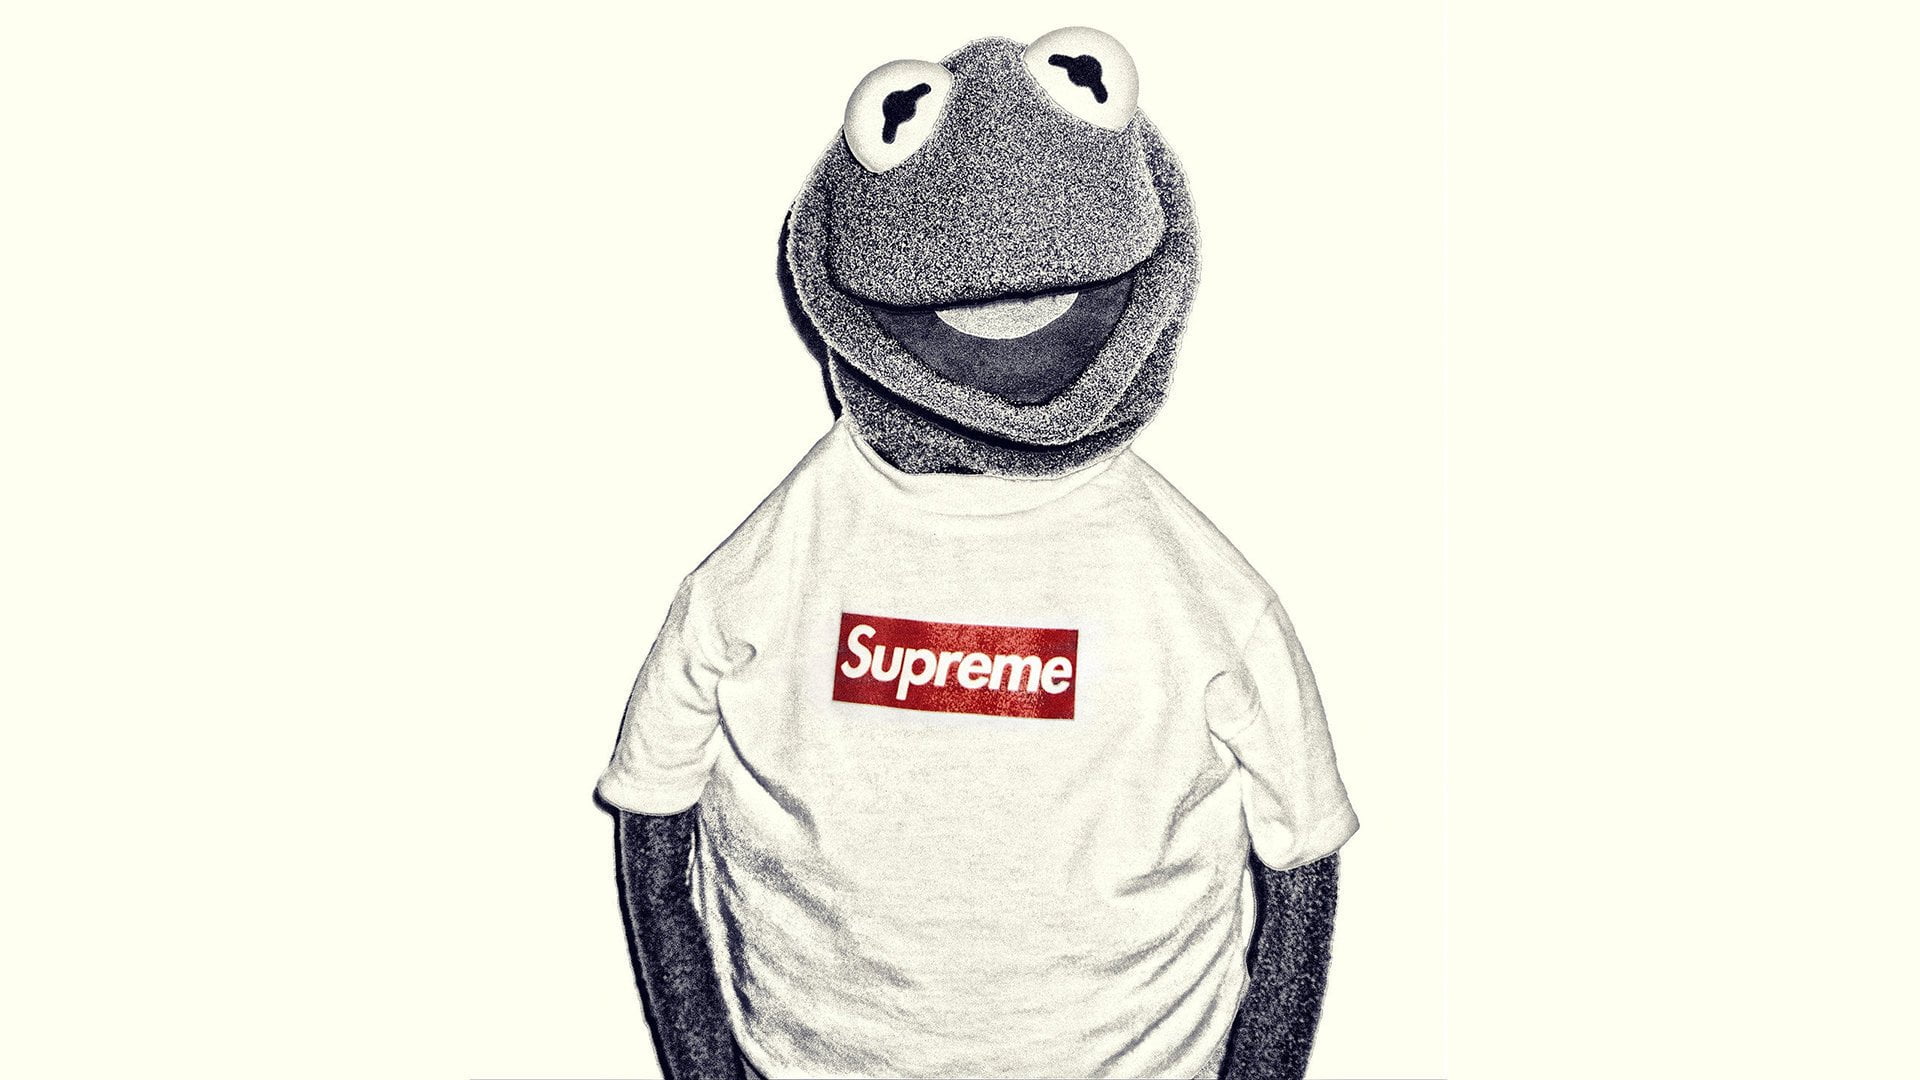 Products, Supreme, Kermit the Frog, Supreme (Brand), one person